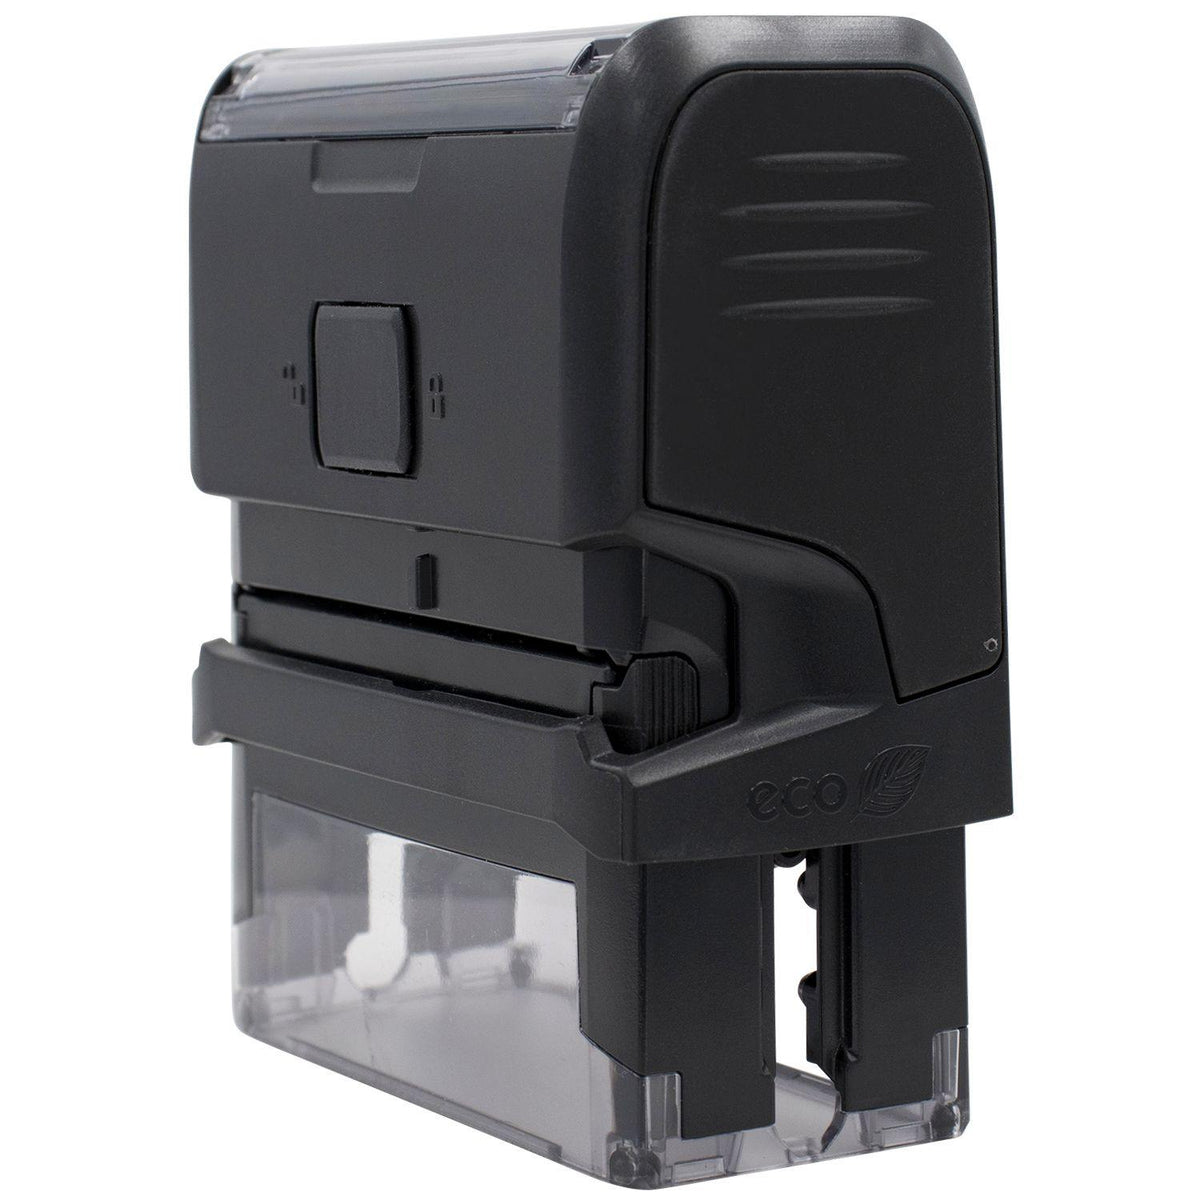 Side View of Large Self-Inking Acreditado Stamp at an Angle